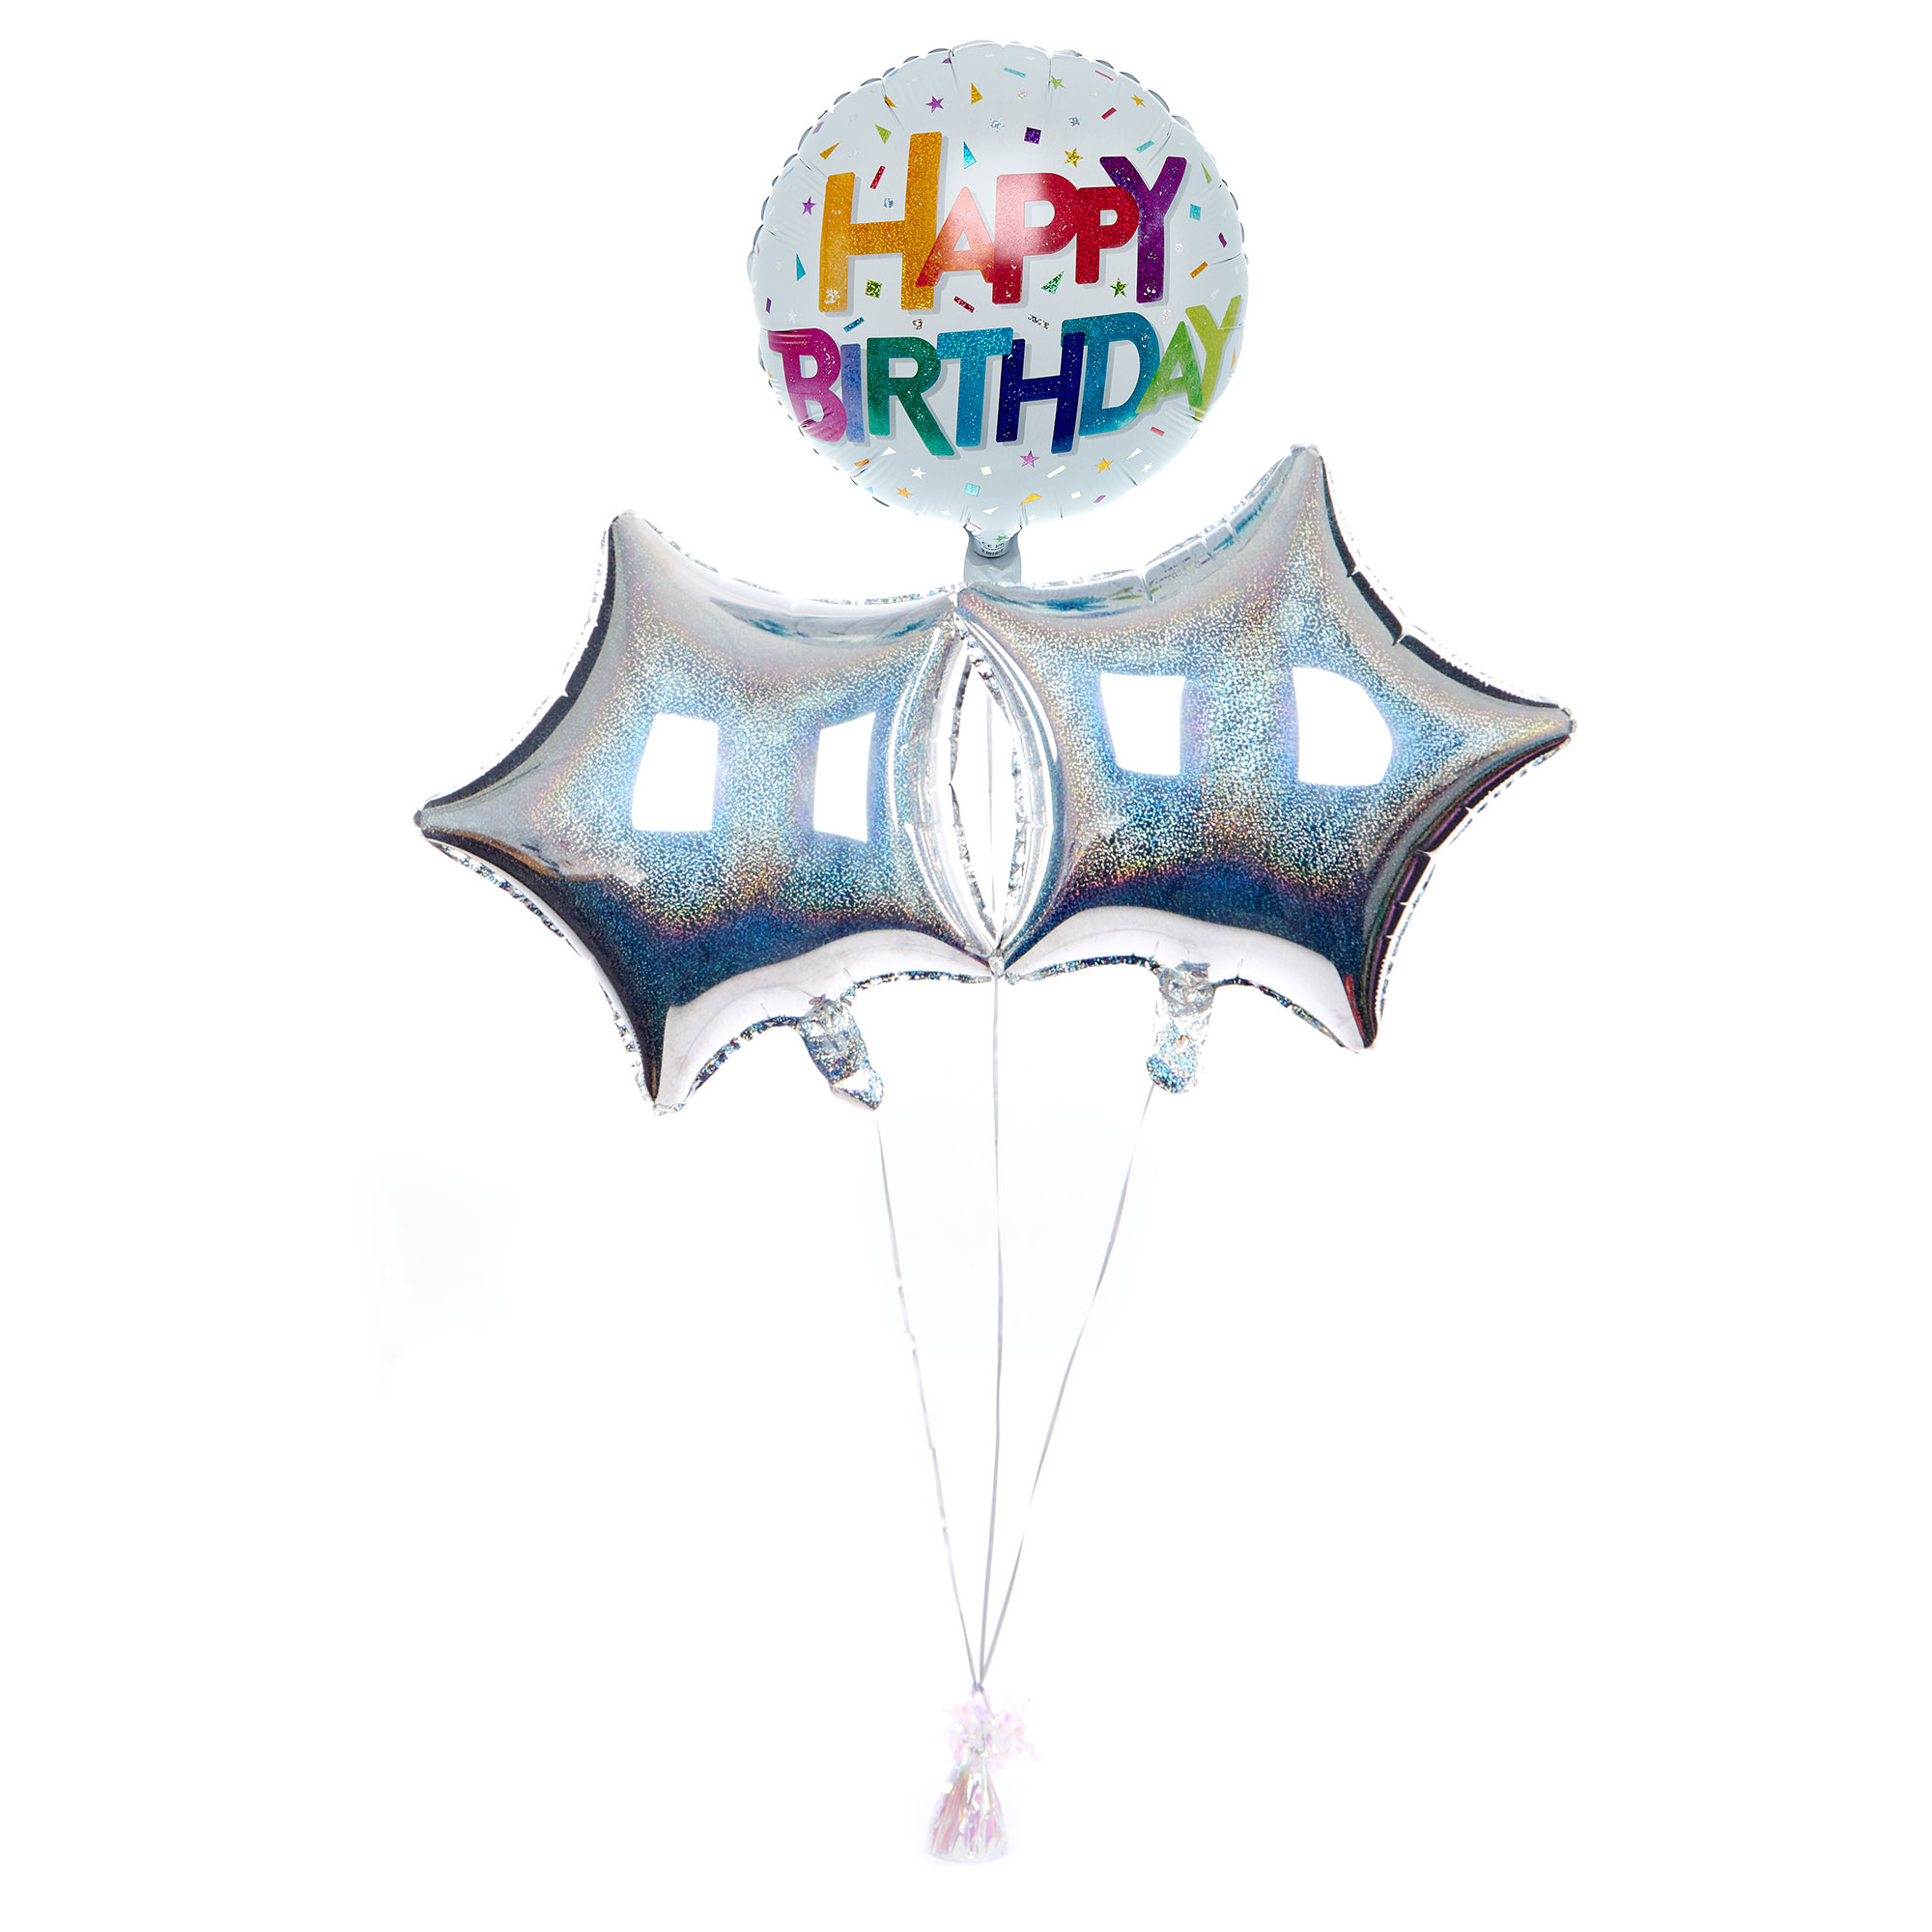 Rainbow Text Happy Birthday Balloon Bouquet - DELIVERED INFLATED! 